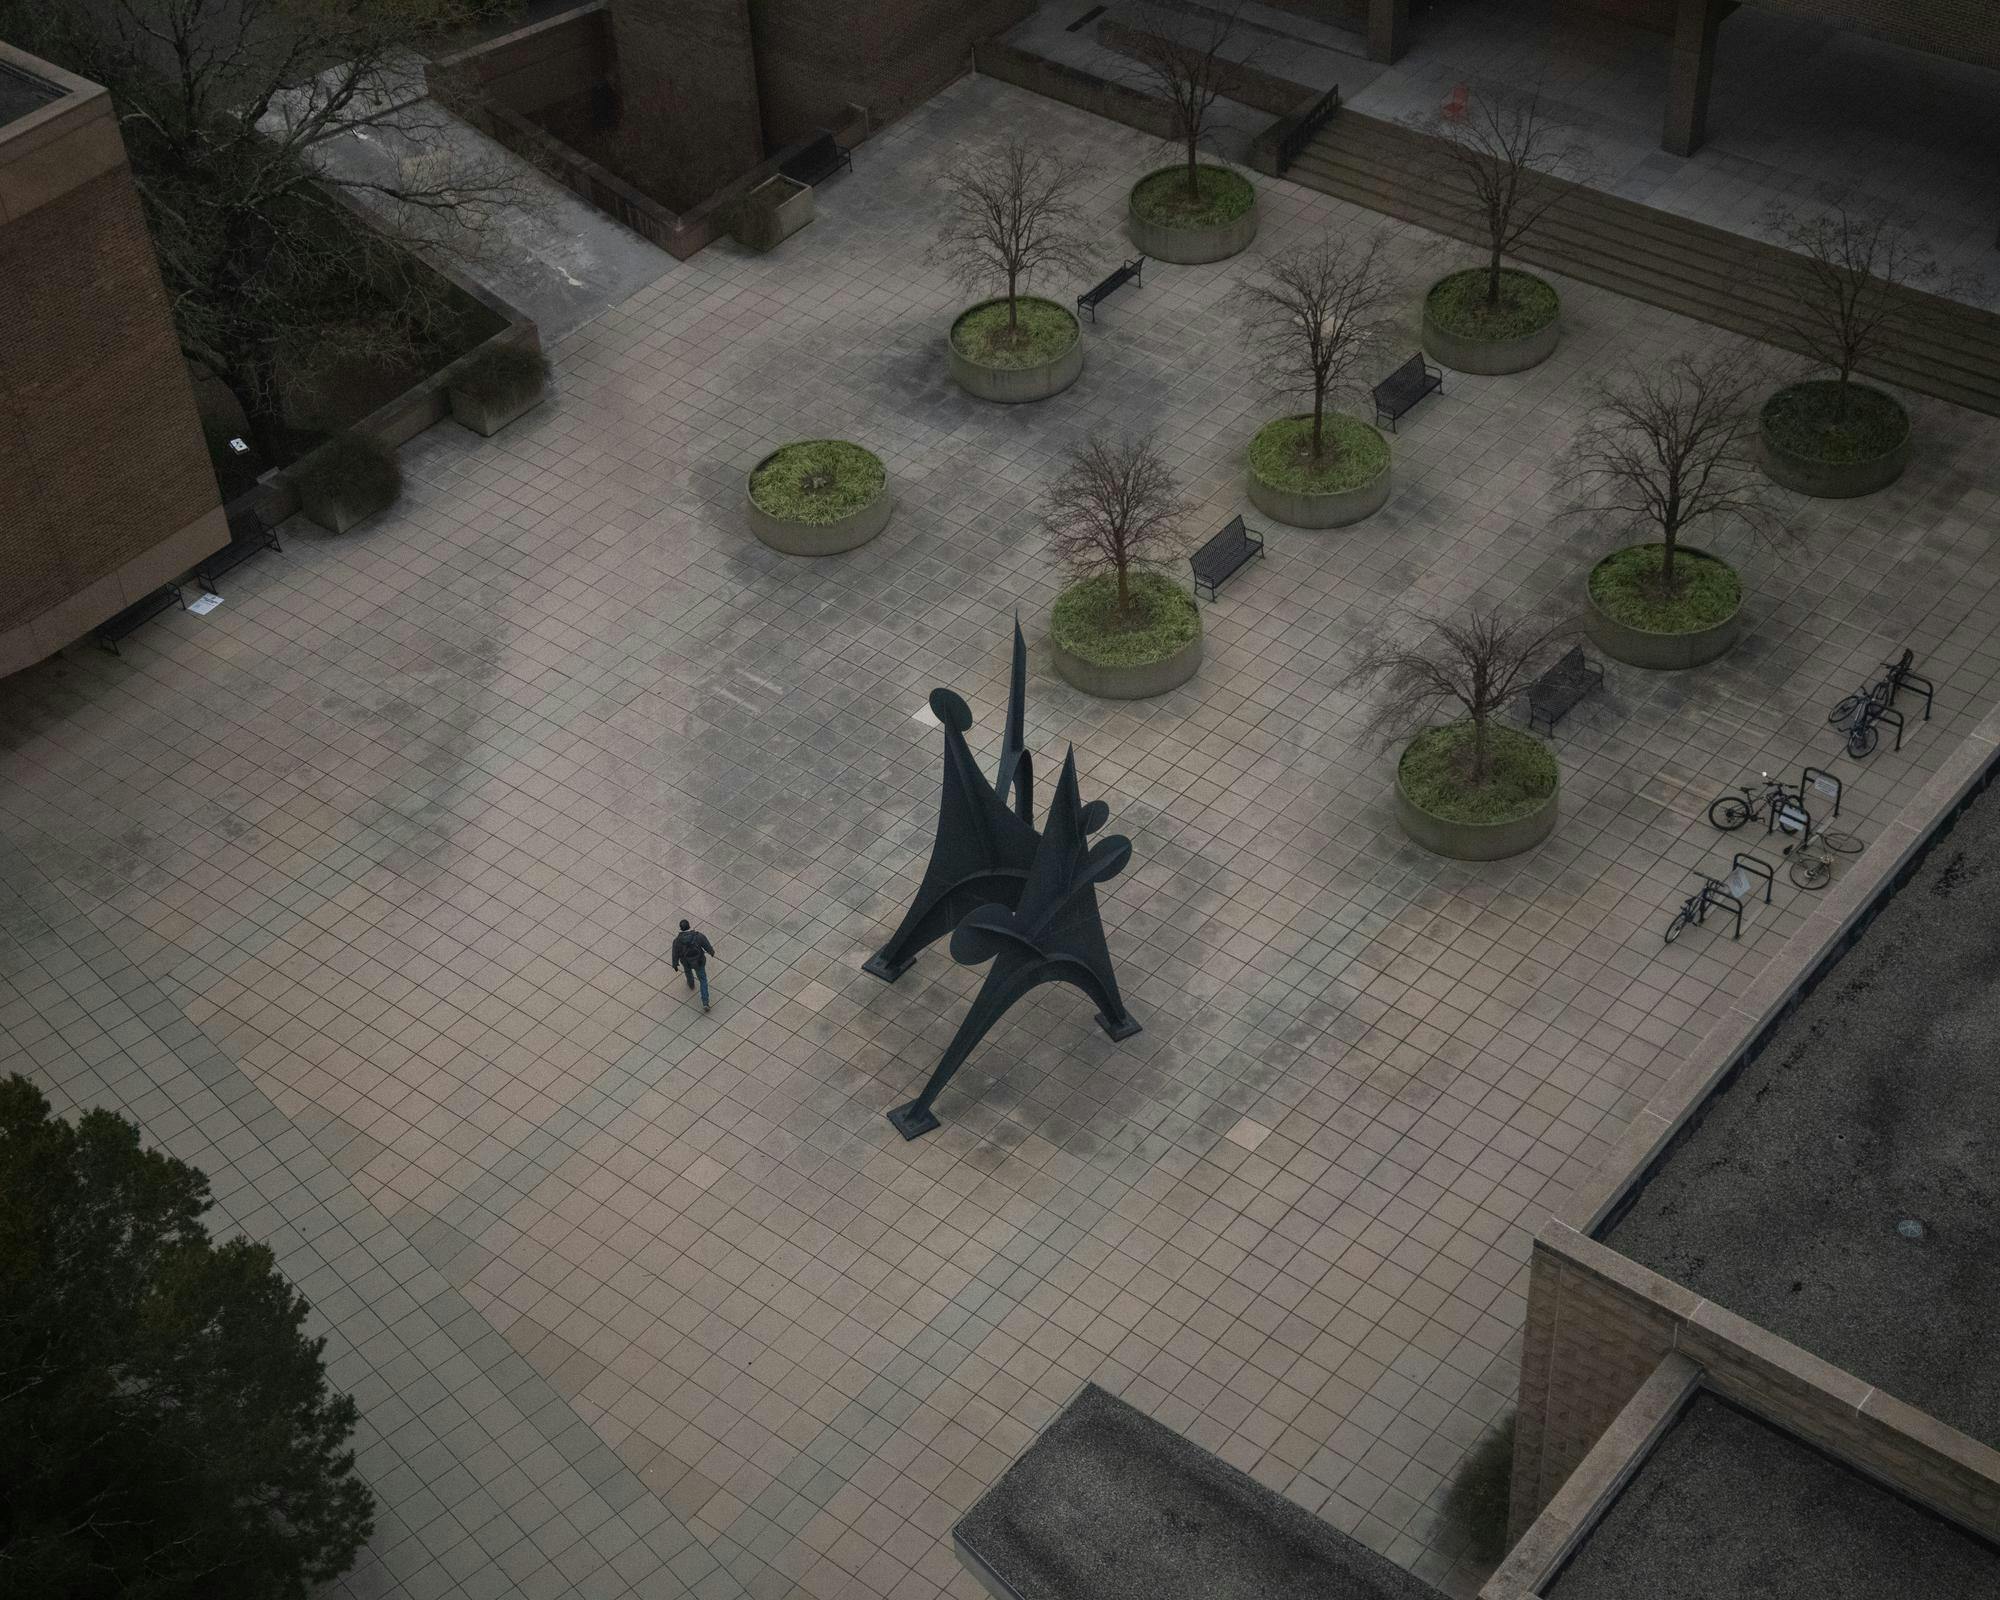 Overhead view of plaza surrounded by buildings; has trees, artistic sculpture, and person walking. 